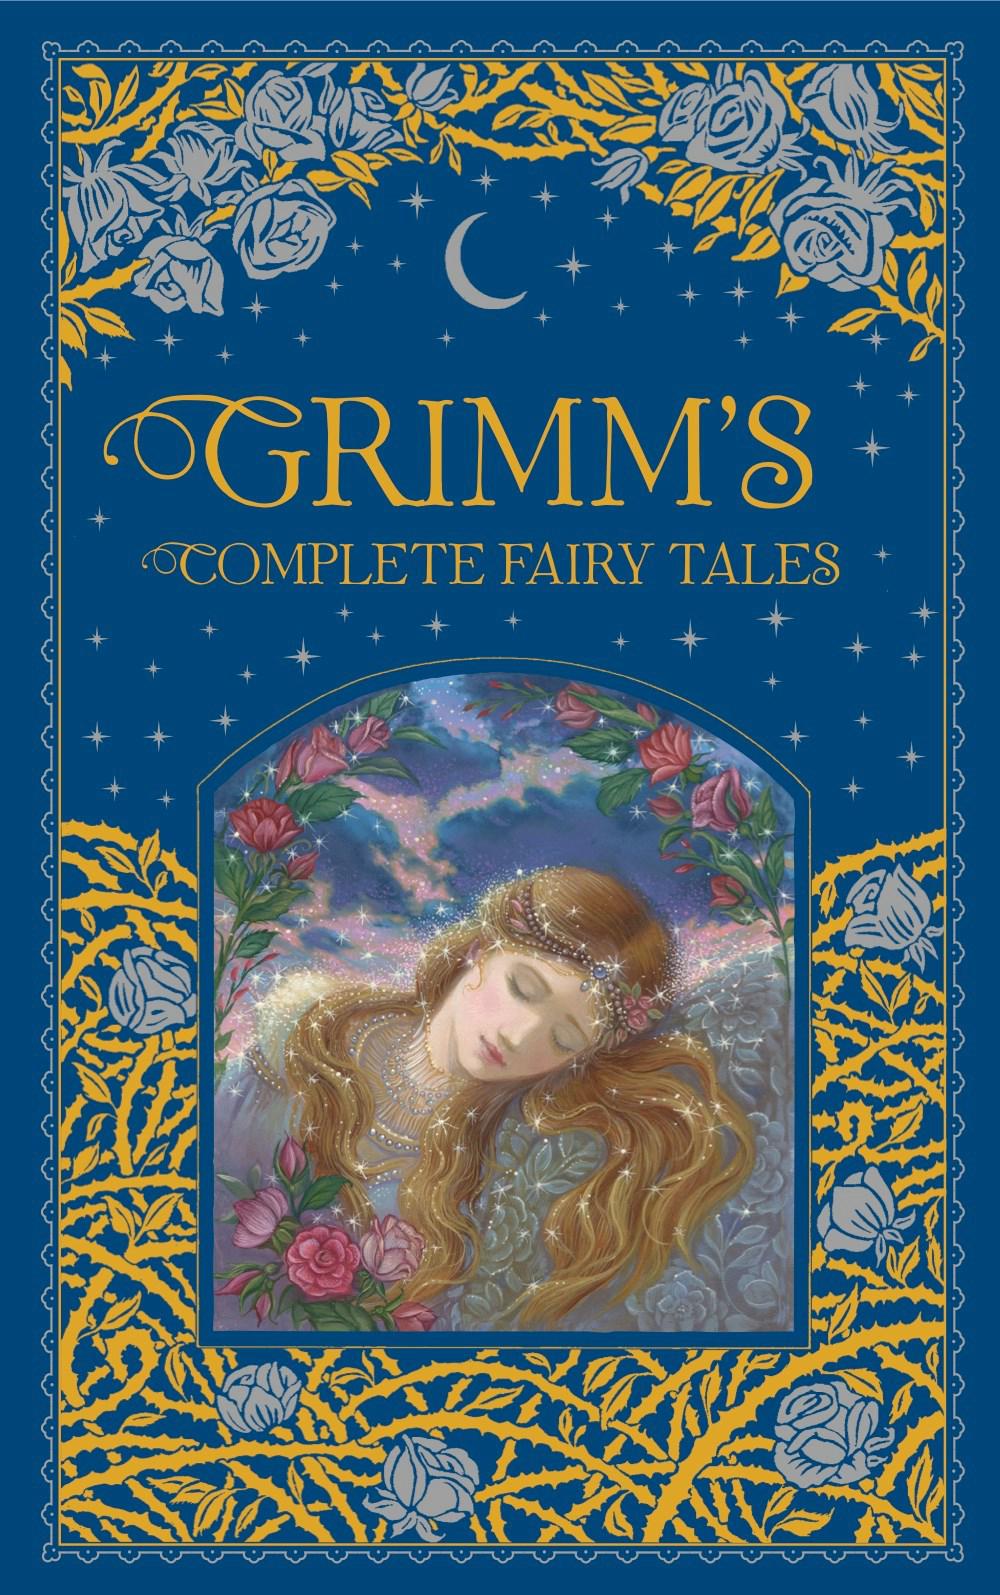 Grimm S Complete Fairy Tales Barnes And Noble Collectible Editions By Grimm Brothers Hardcover